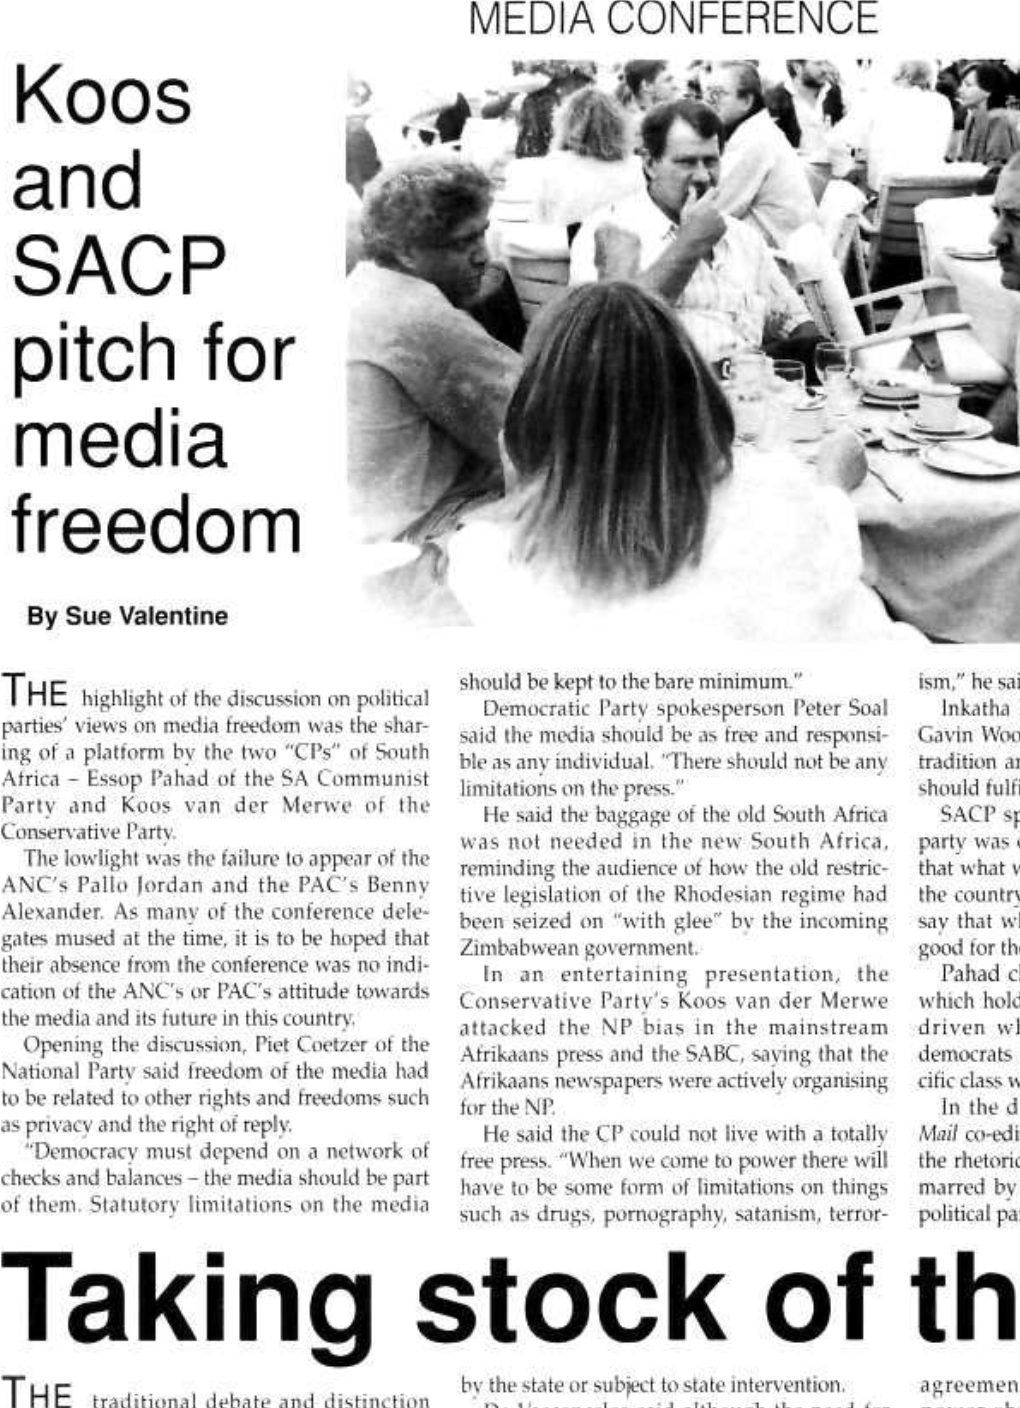 Koos and SACP Pitch for Media Freedom